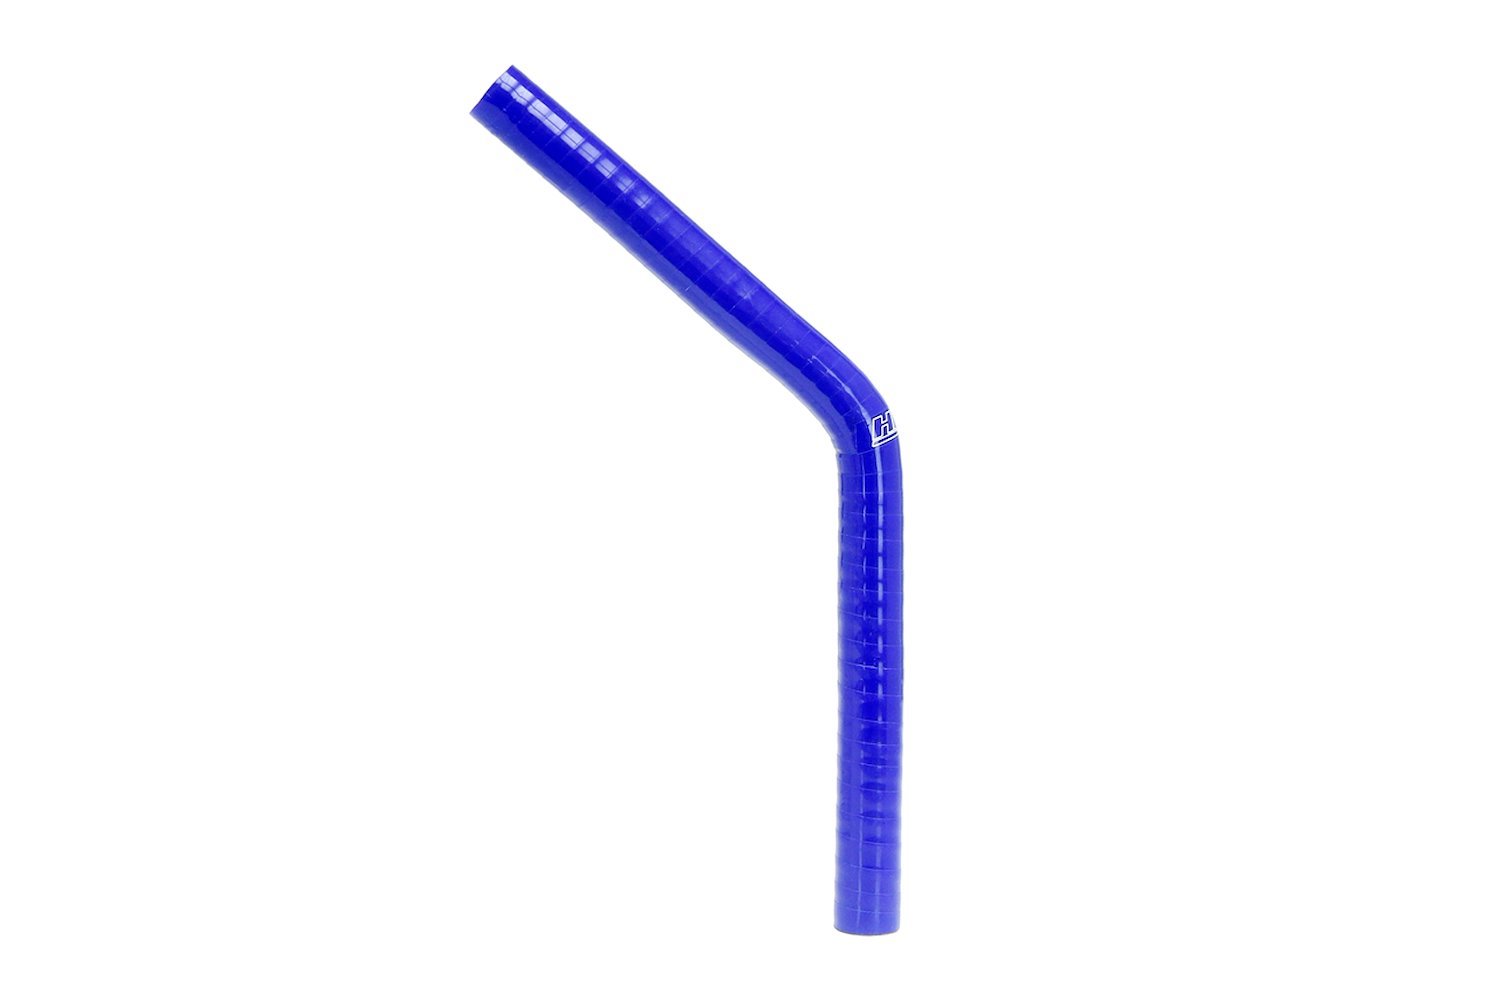 HTSEC45-044-BLUE Silicone 45-Degree Elbow Coupler Hose, High-Temp 4-Ply Reinforced, 7/16 in. ID, Blue